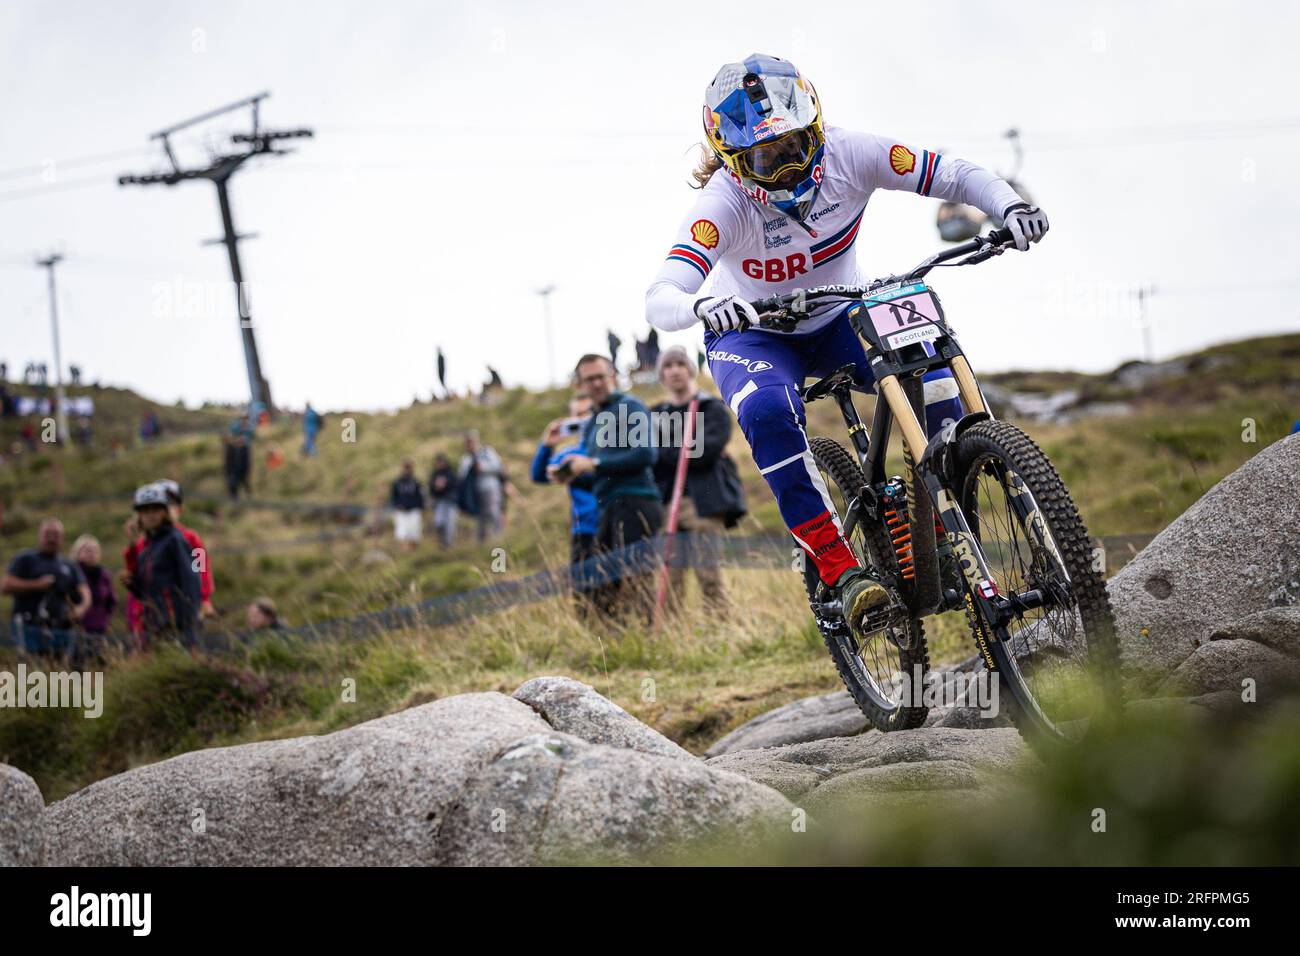 Biker Rachel Atherton of Great Britain in action during the UCI Cycling World Championships Mountain Bike Downhill race at Fort William in the Highlan Stock Photo